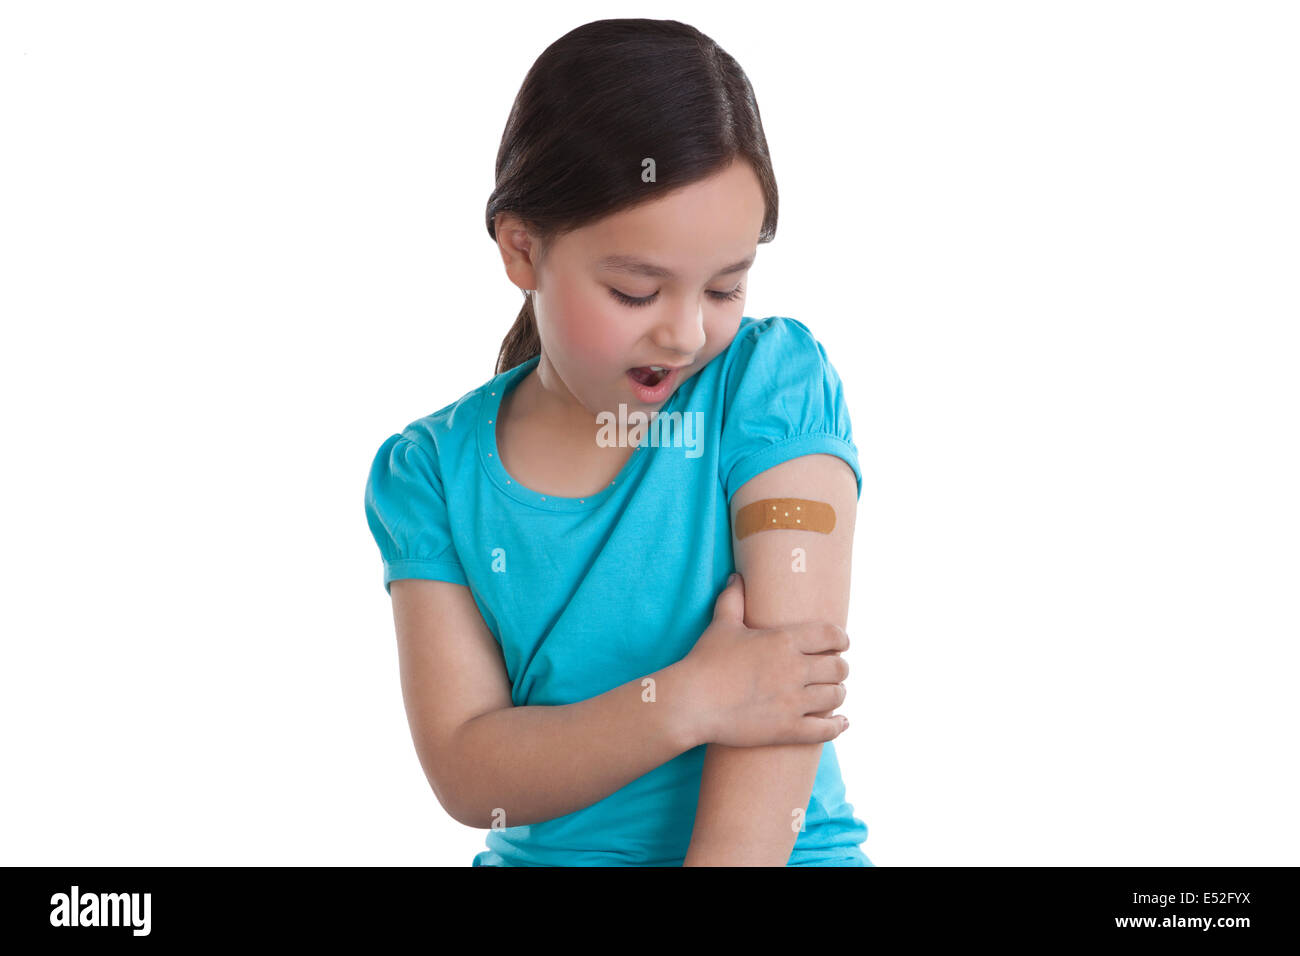 Little girl with band-aid on arm Stock Photo